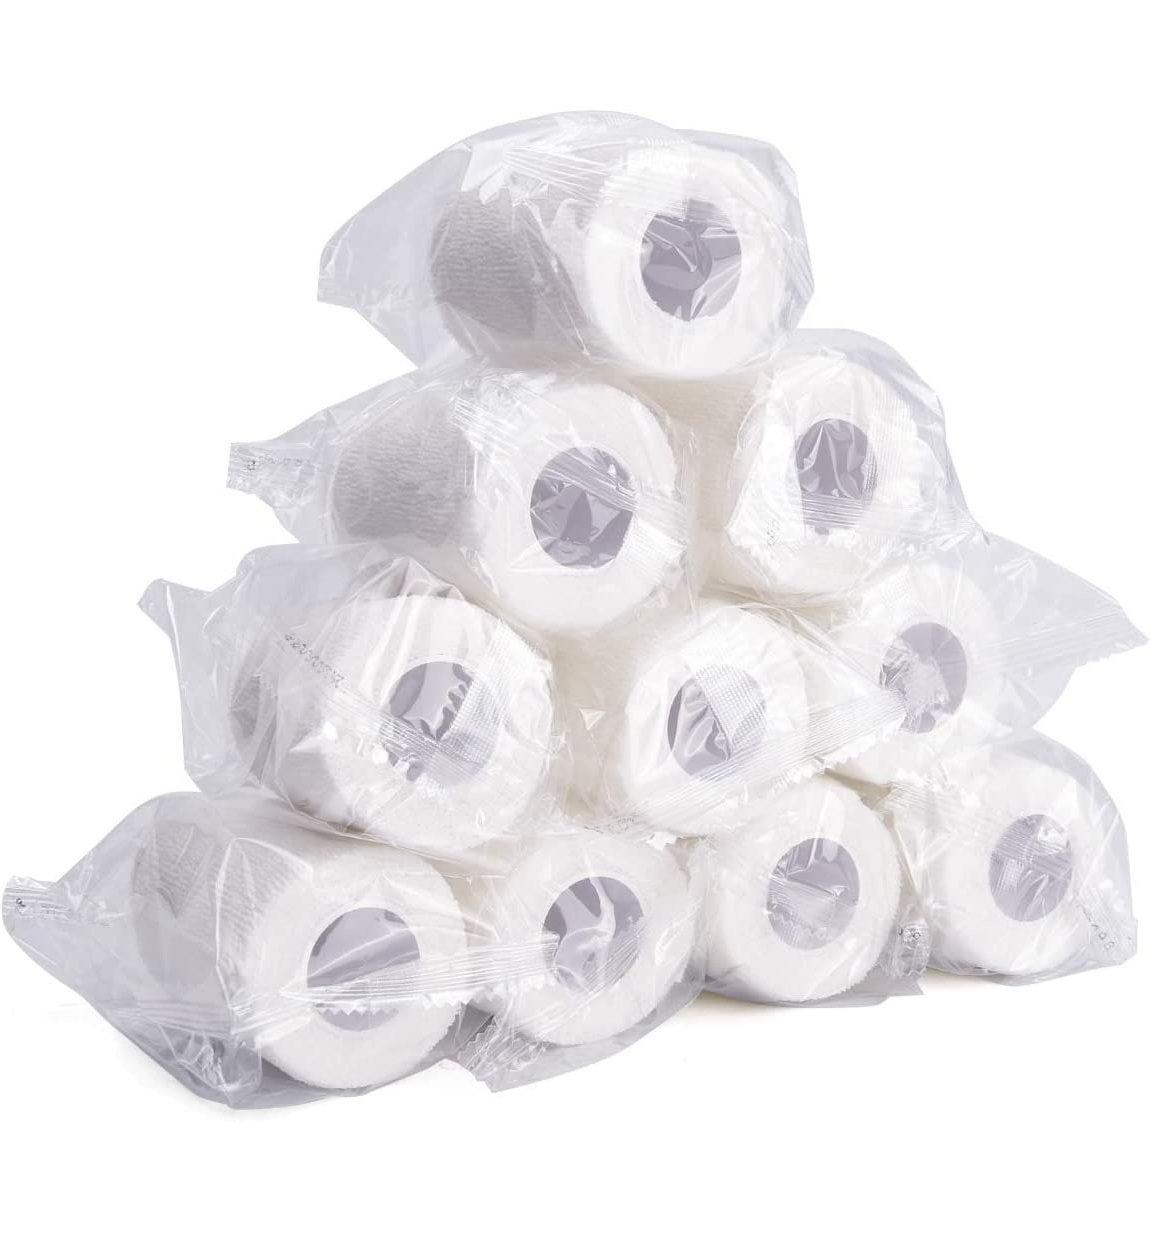 Cheap Retail Non Woven Cohesive Bandage with Display Box